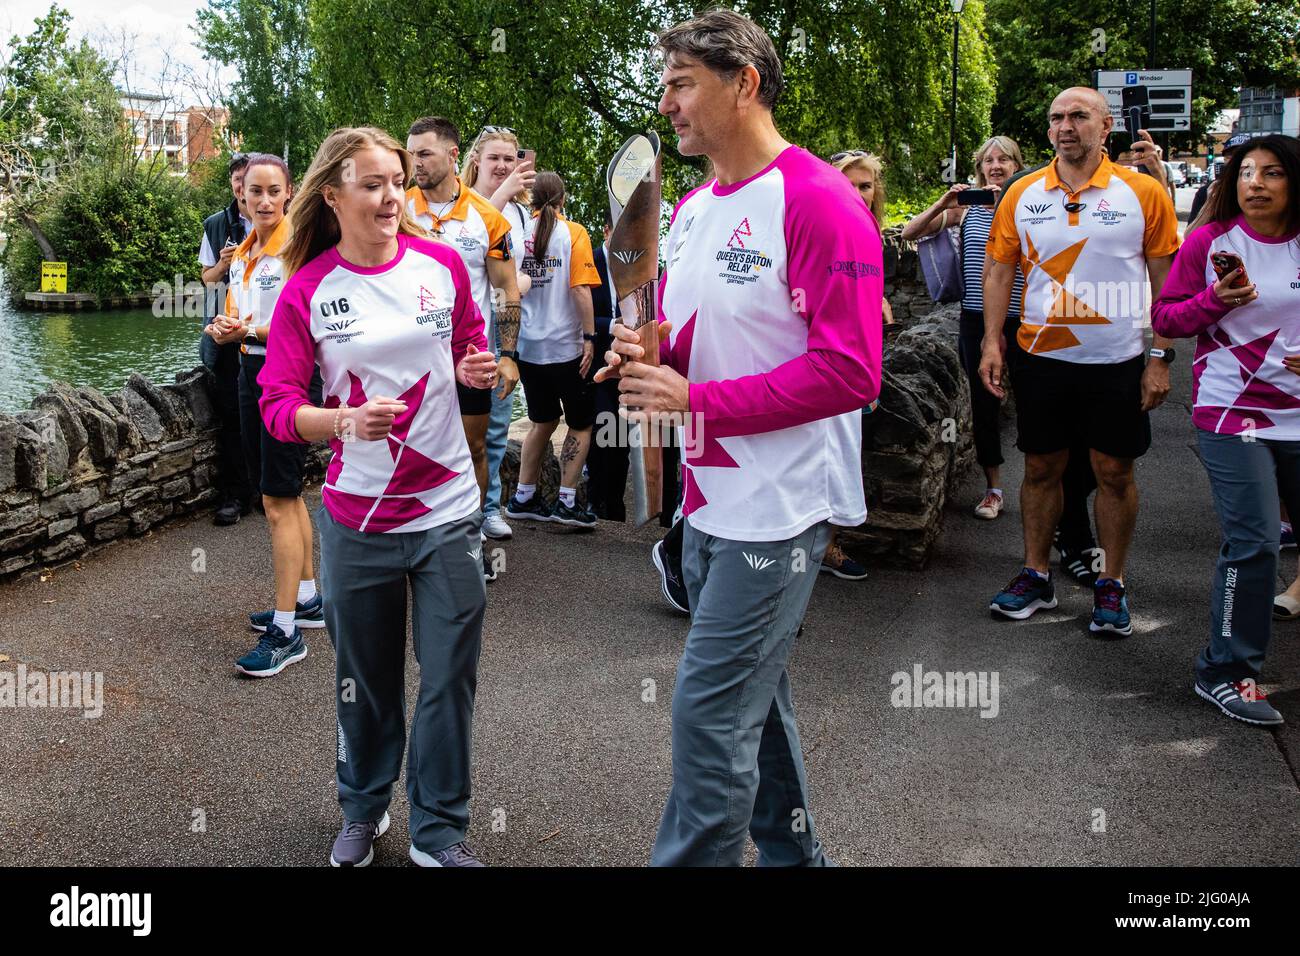 Windsor and Eton, UK. 6th July, 2022. Batonbearers Jemma Wood and Ray Stevens exchange the Queen's Baton alongside the River Thames during the Queen's Baton Relay. The Queen's Baton is currently on a 25-day tour of the English regions en route to the Commonwealth Games. Credit: Mark Kerrison/Alamy Live News Stock Photo